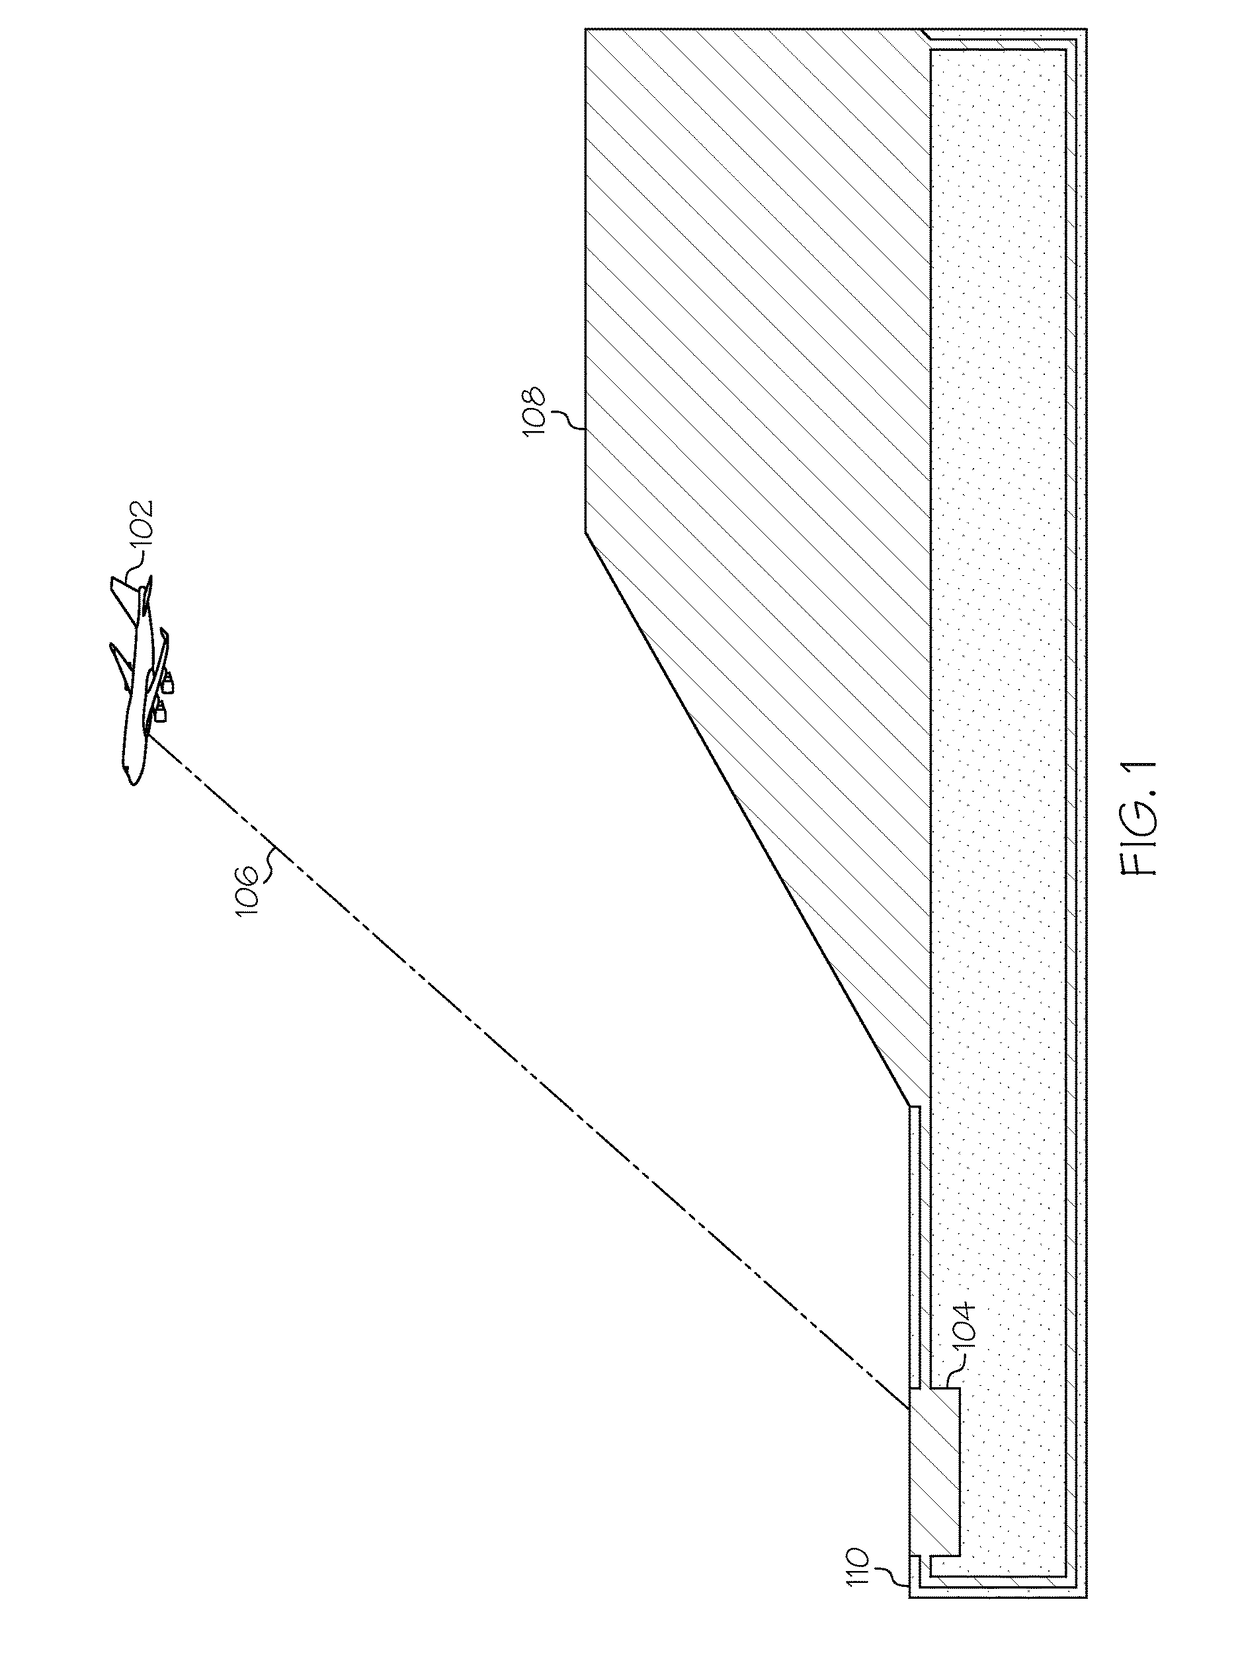 Methods and apparatus for managing a premature descent envelope during descent of an aircraft